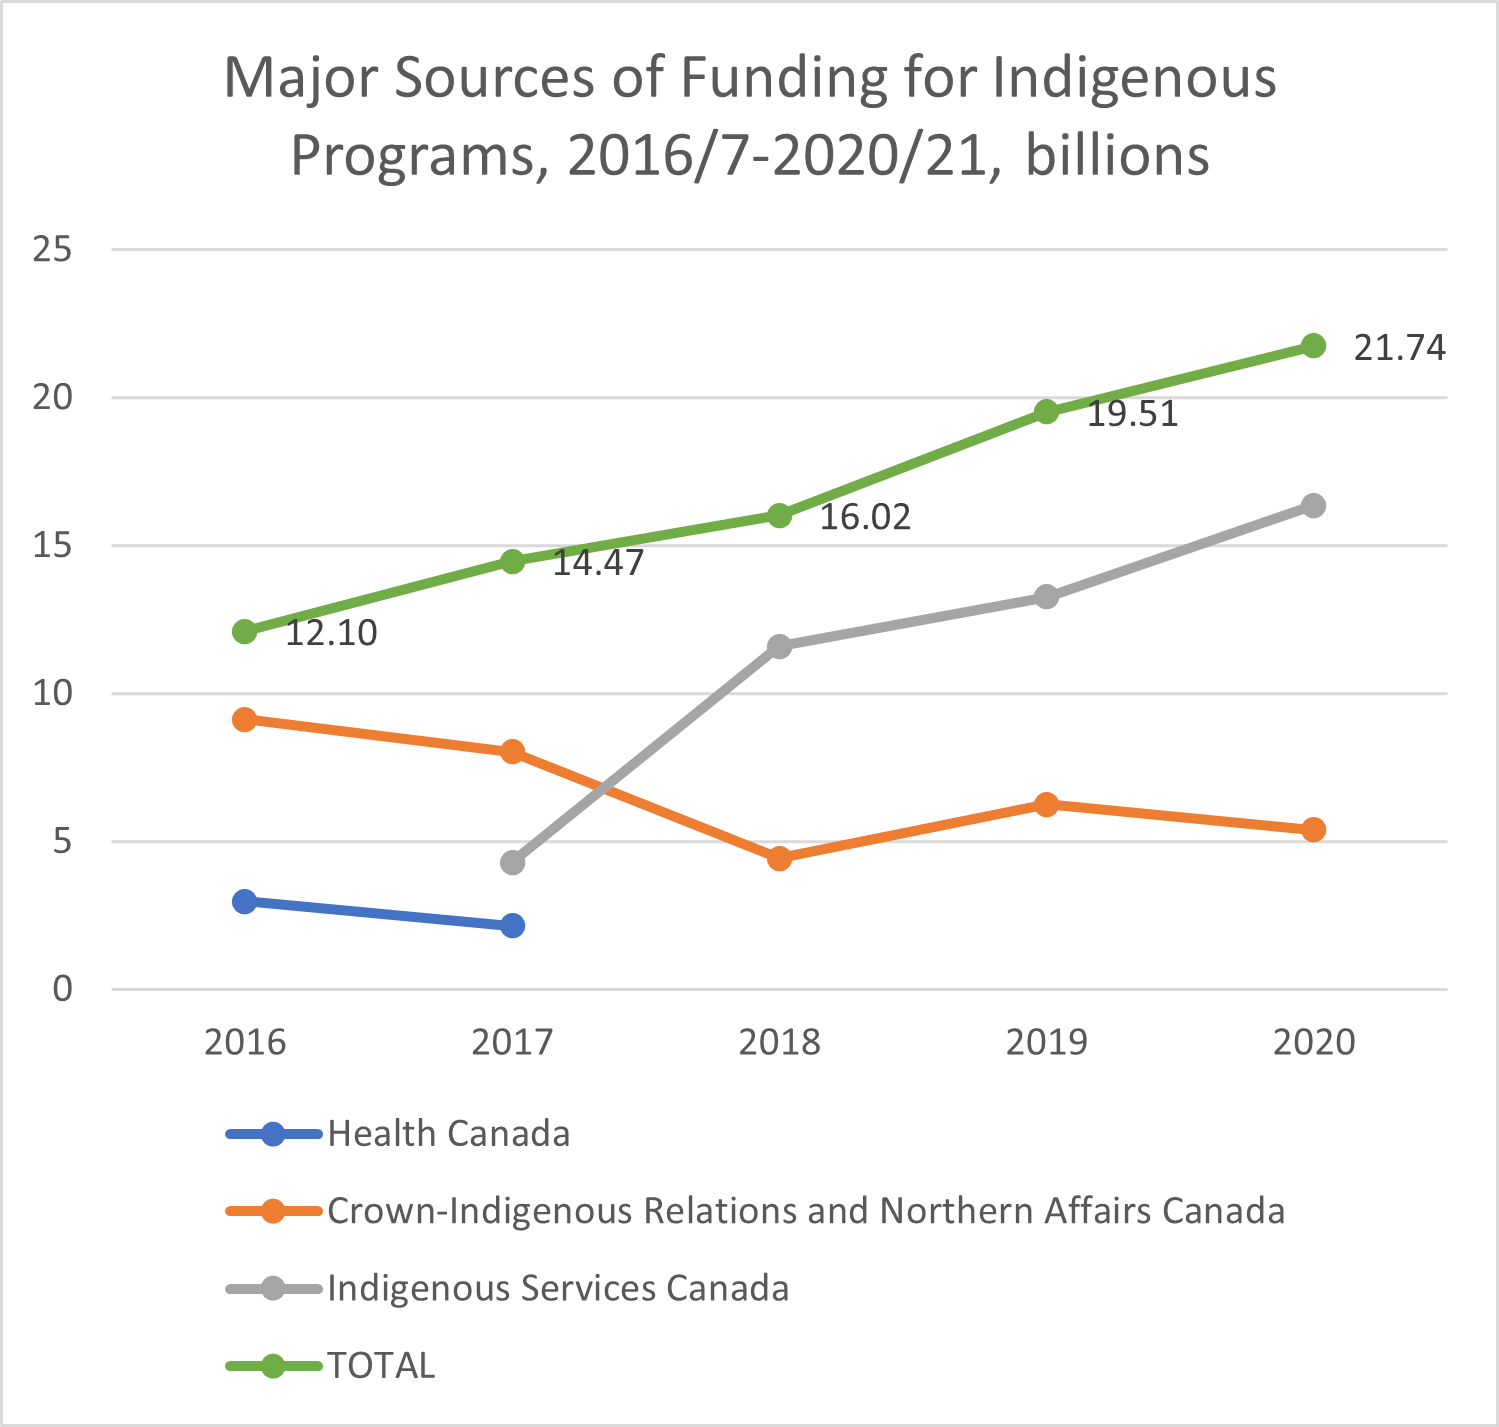 This graph shows us that total spending on Indigenous-directed programs almost doubled from 12.1 billion in 2016/2017 to 21.74 billion in 2020/2021. Most of this was due to increased program spending by Indigenous Services Canada. Spending by Crown-Indigenous Relations and Northern Affairs Canada actually declined during the period.